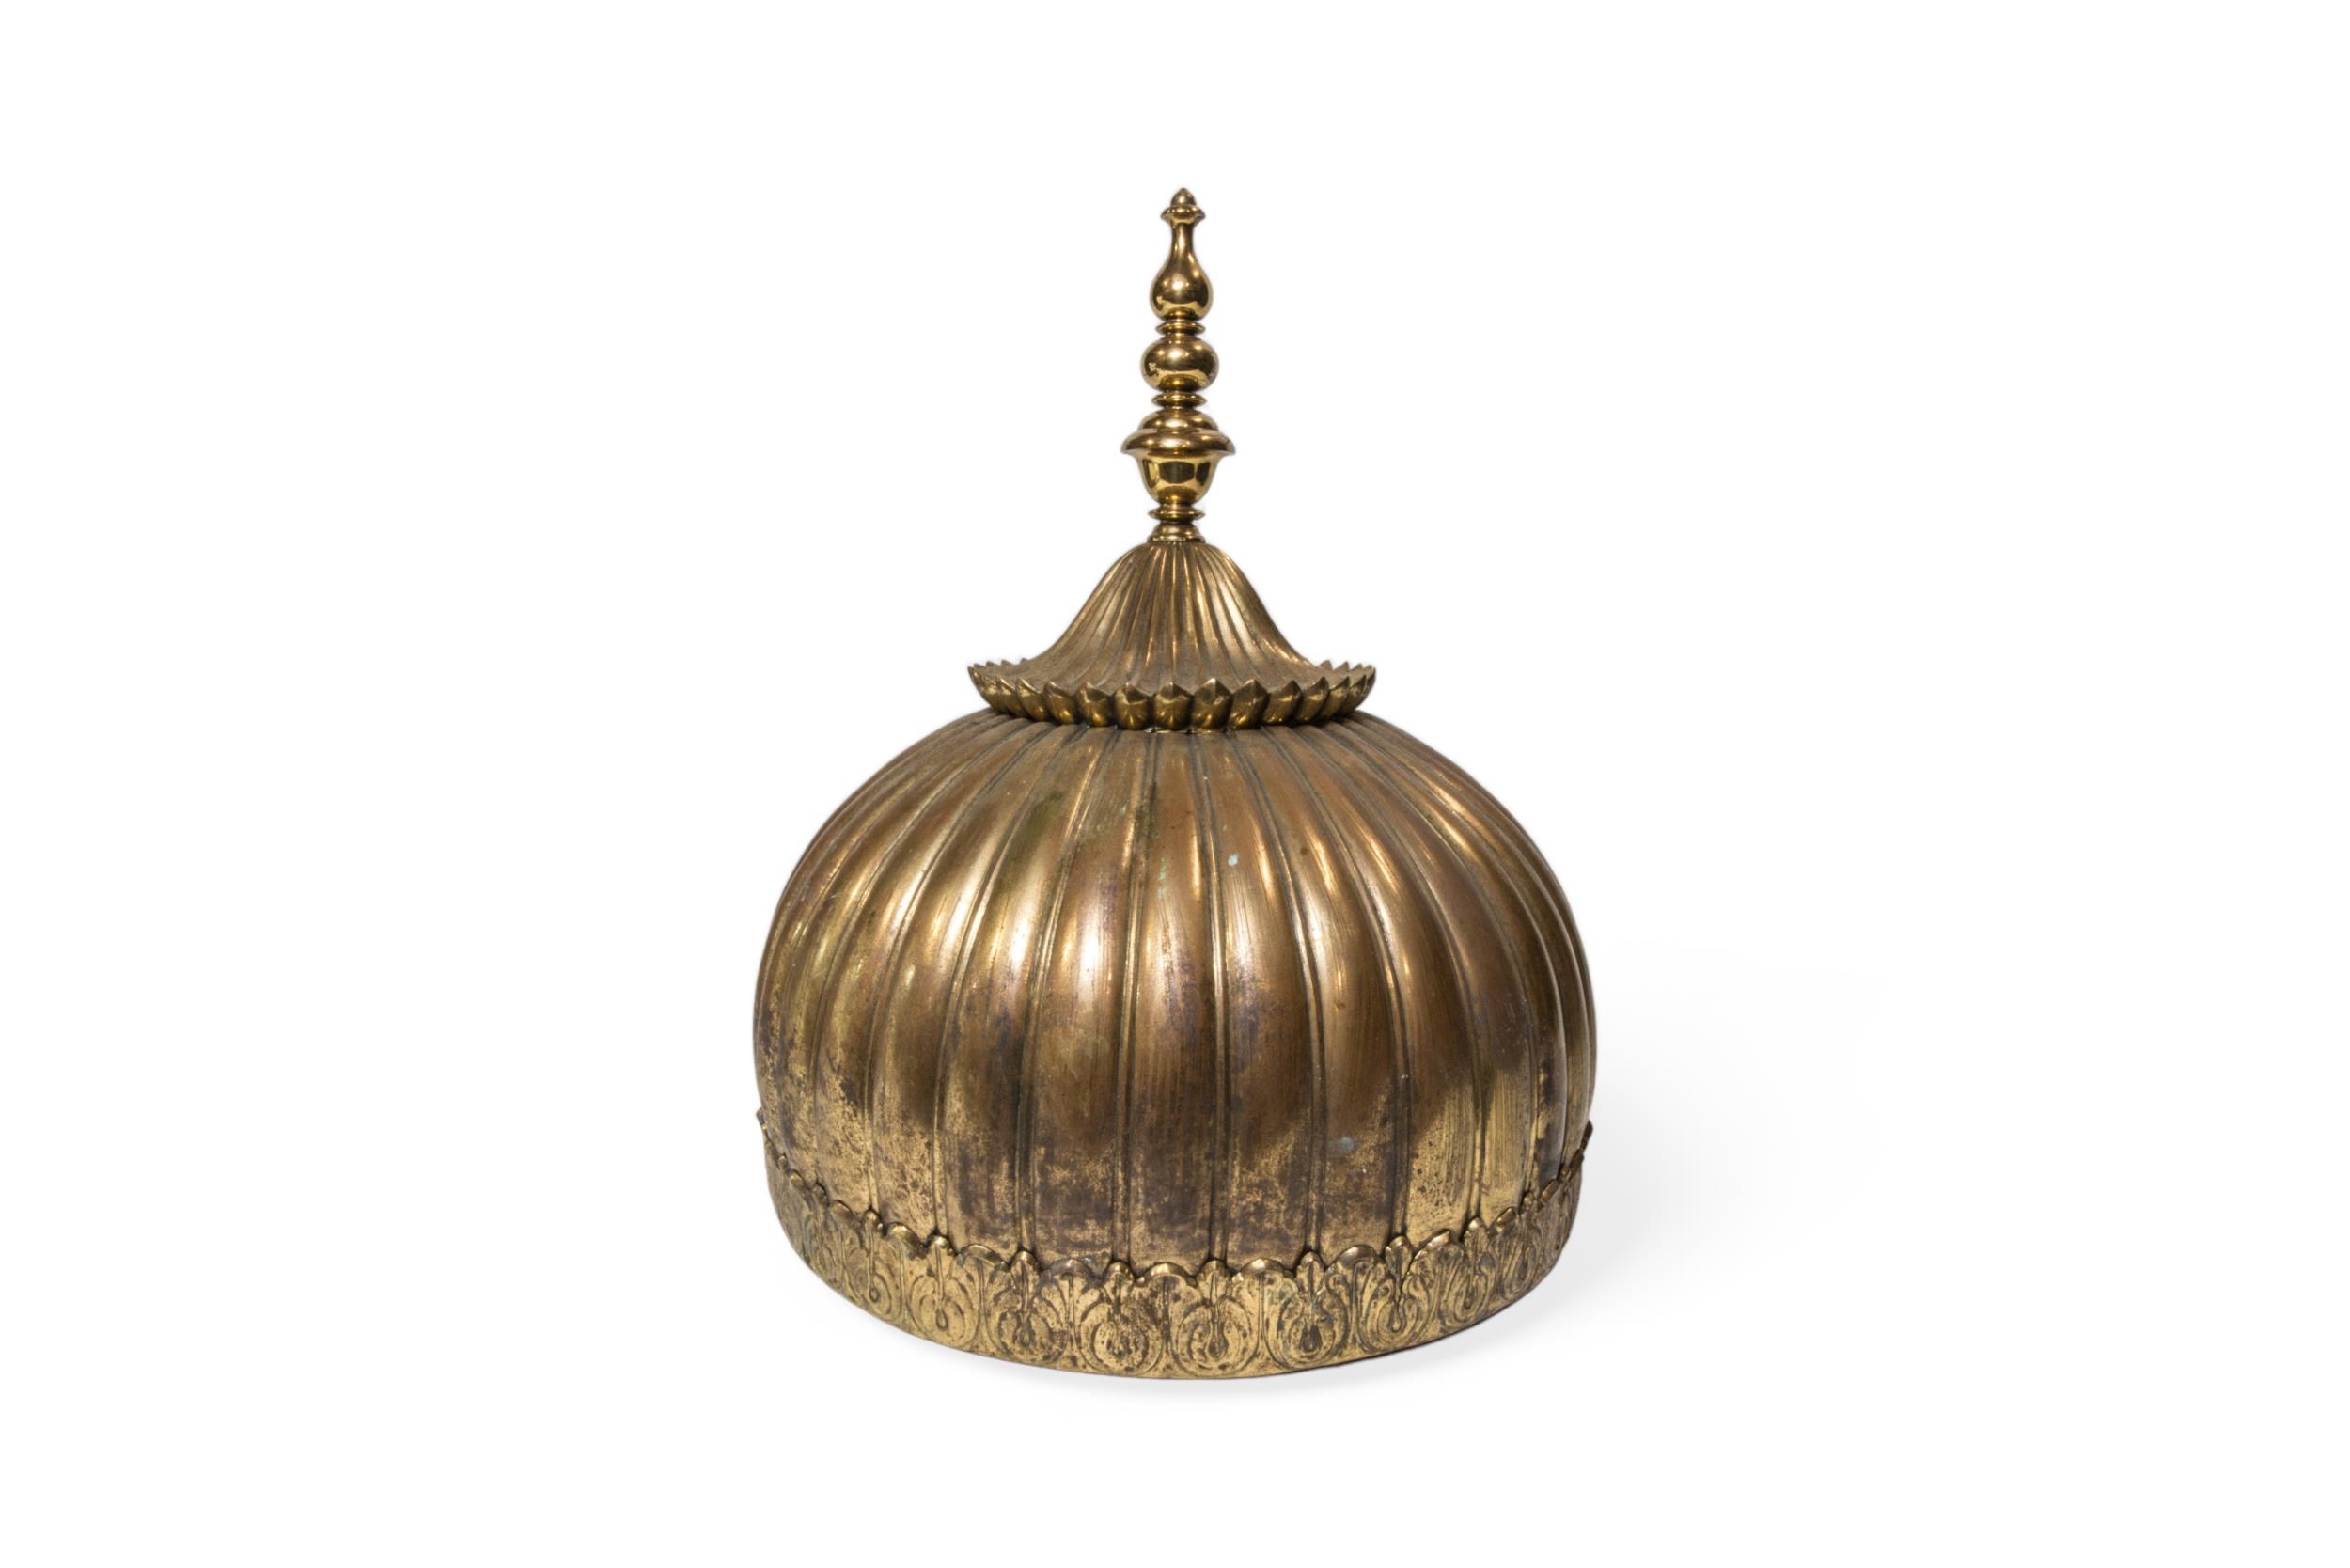 A BRASS MUGHAL STYLE DOME, POSSIBLY A BED CANOPY, 20TH CENTURY. 47cms high